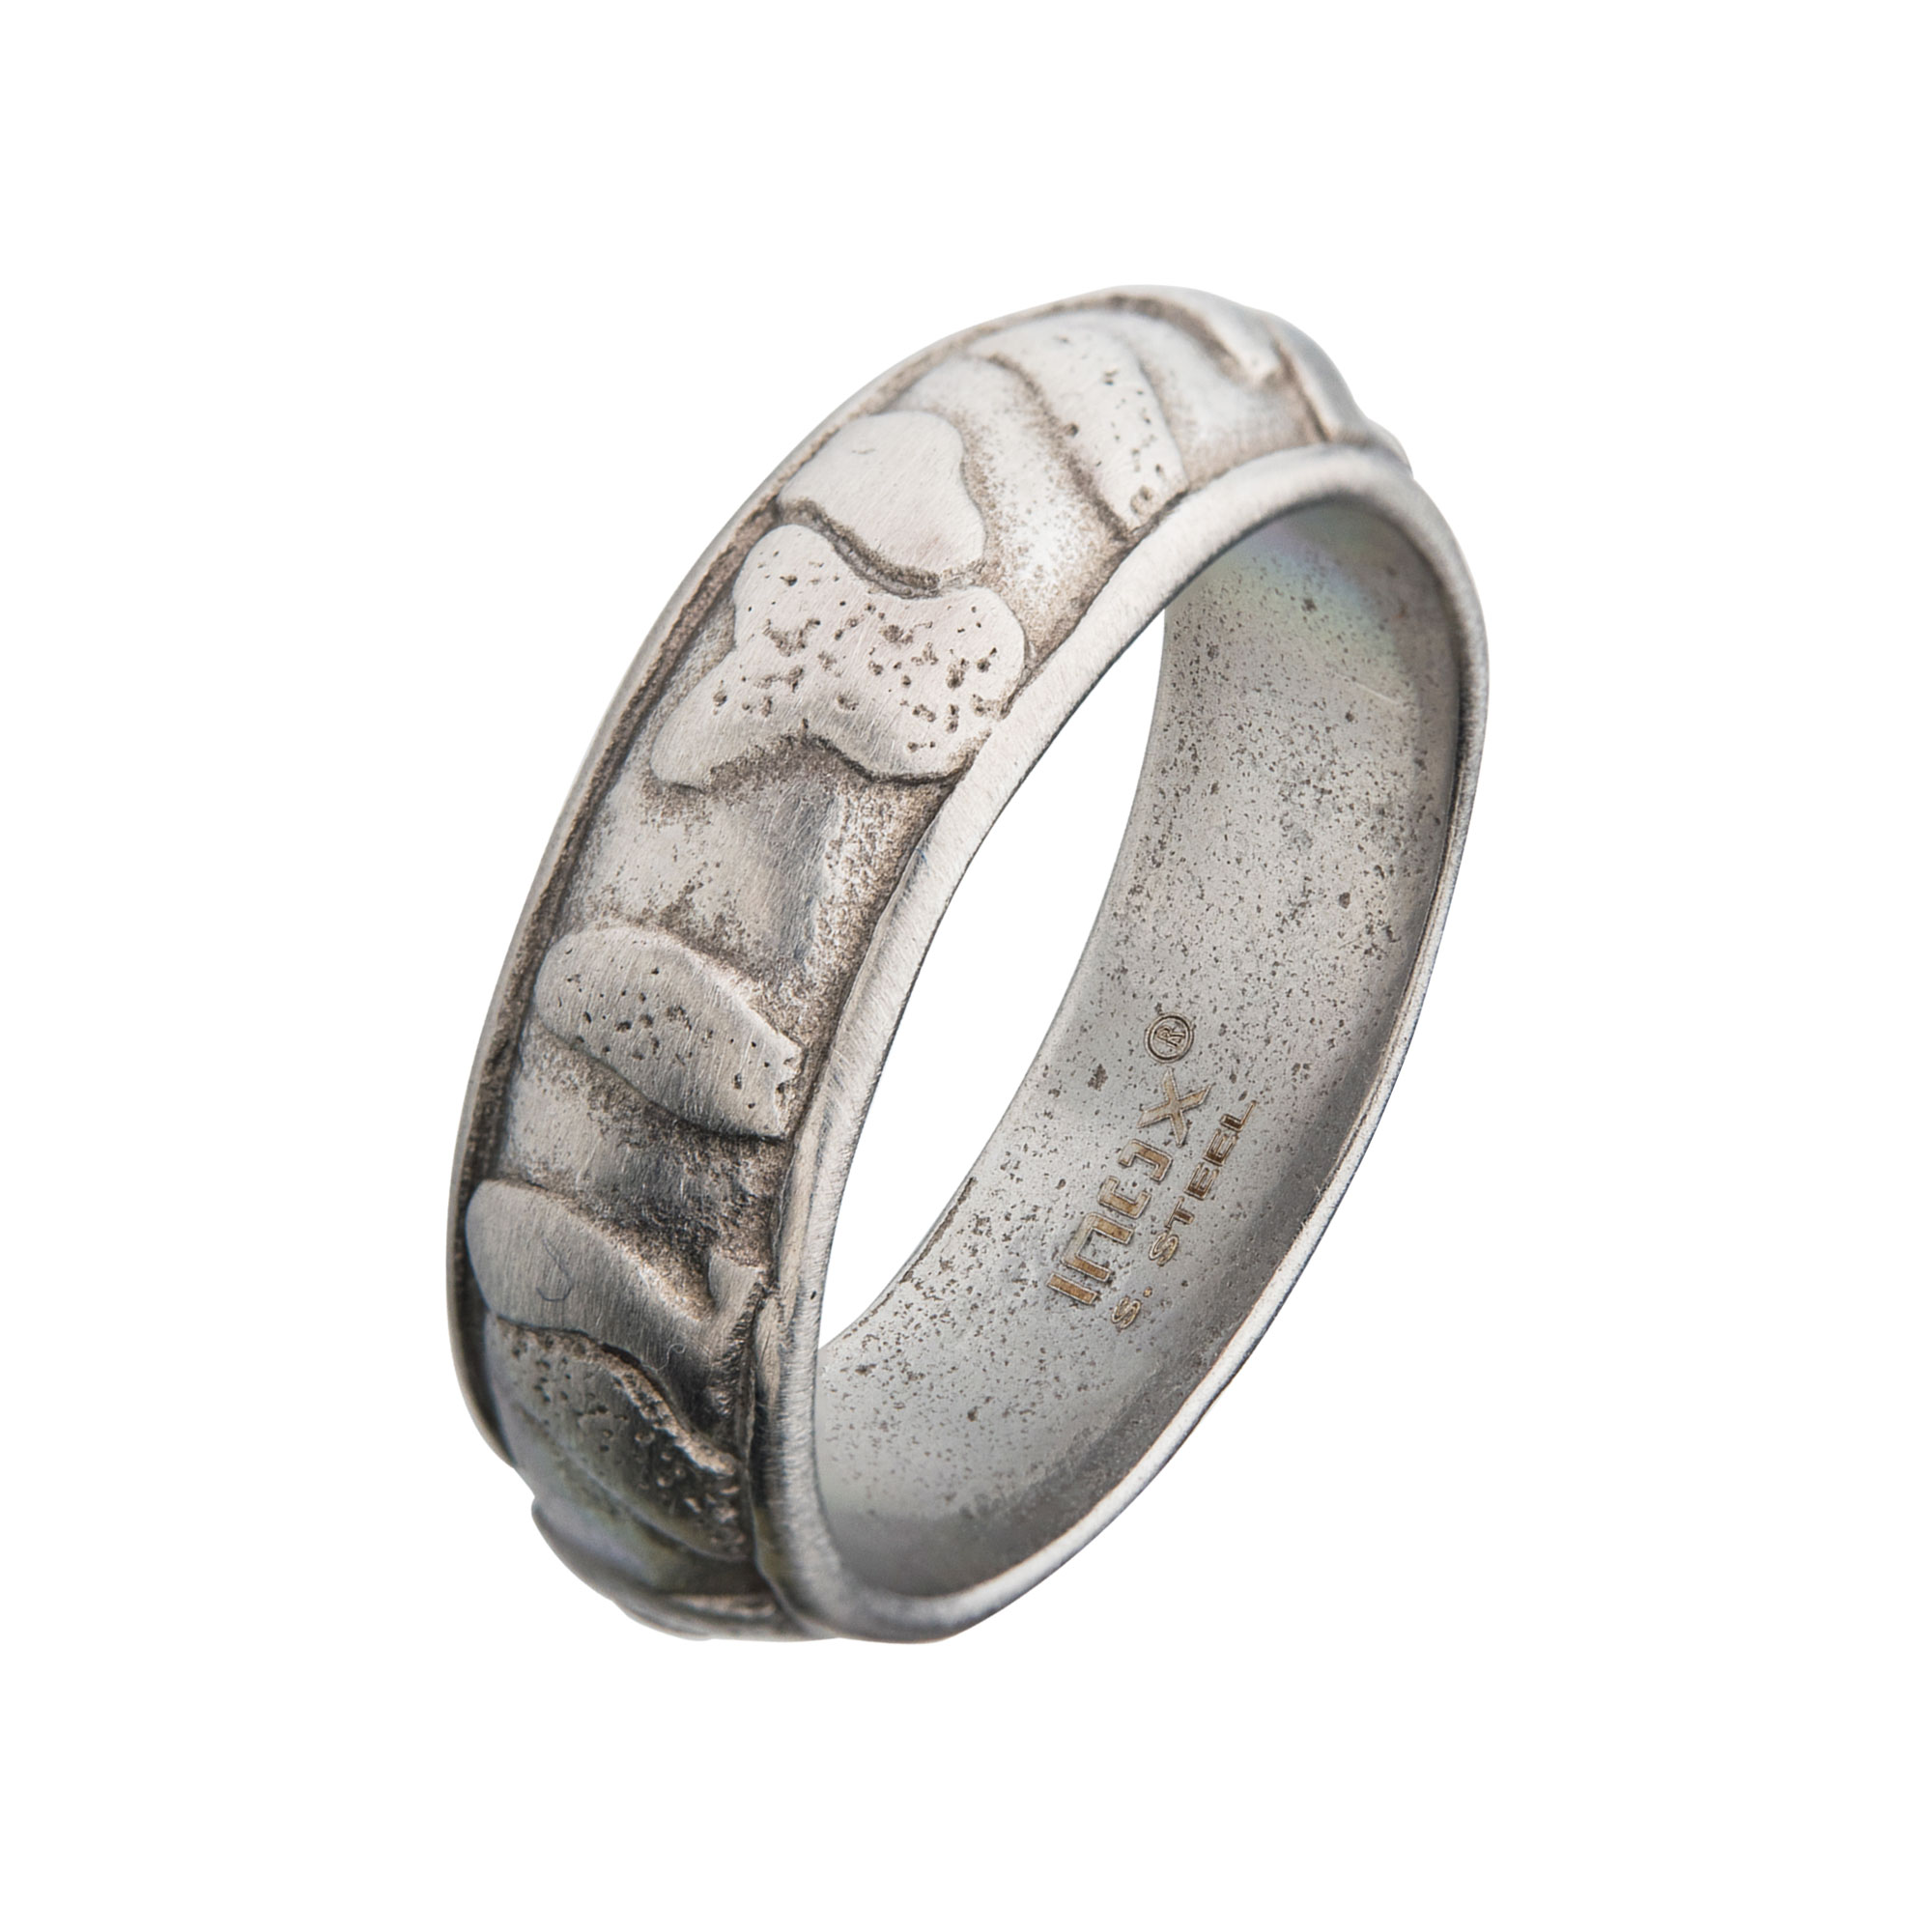 7.5mm Matte Steel 3D Canyon Pattern Ring Enchanted Jewelry Plainfield, CT